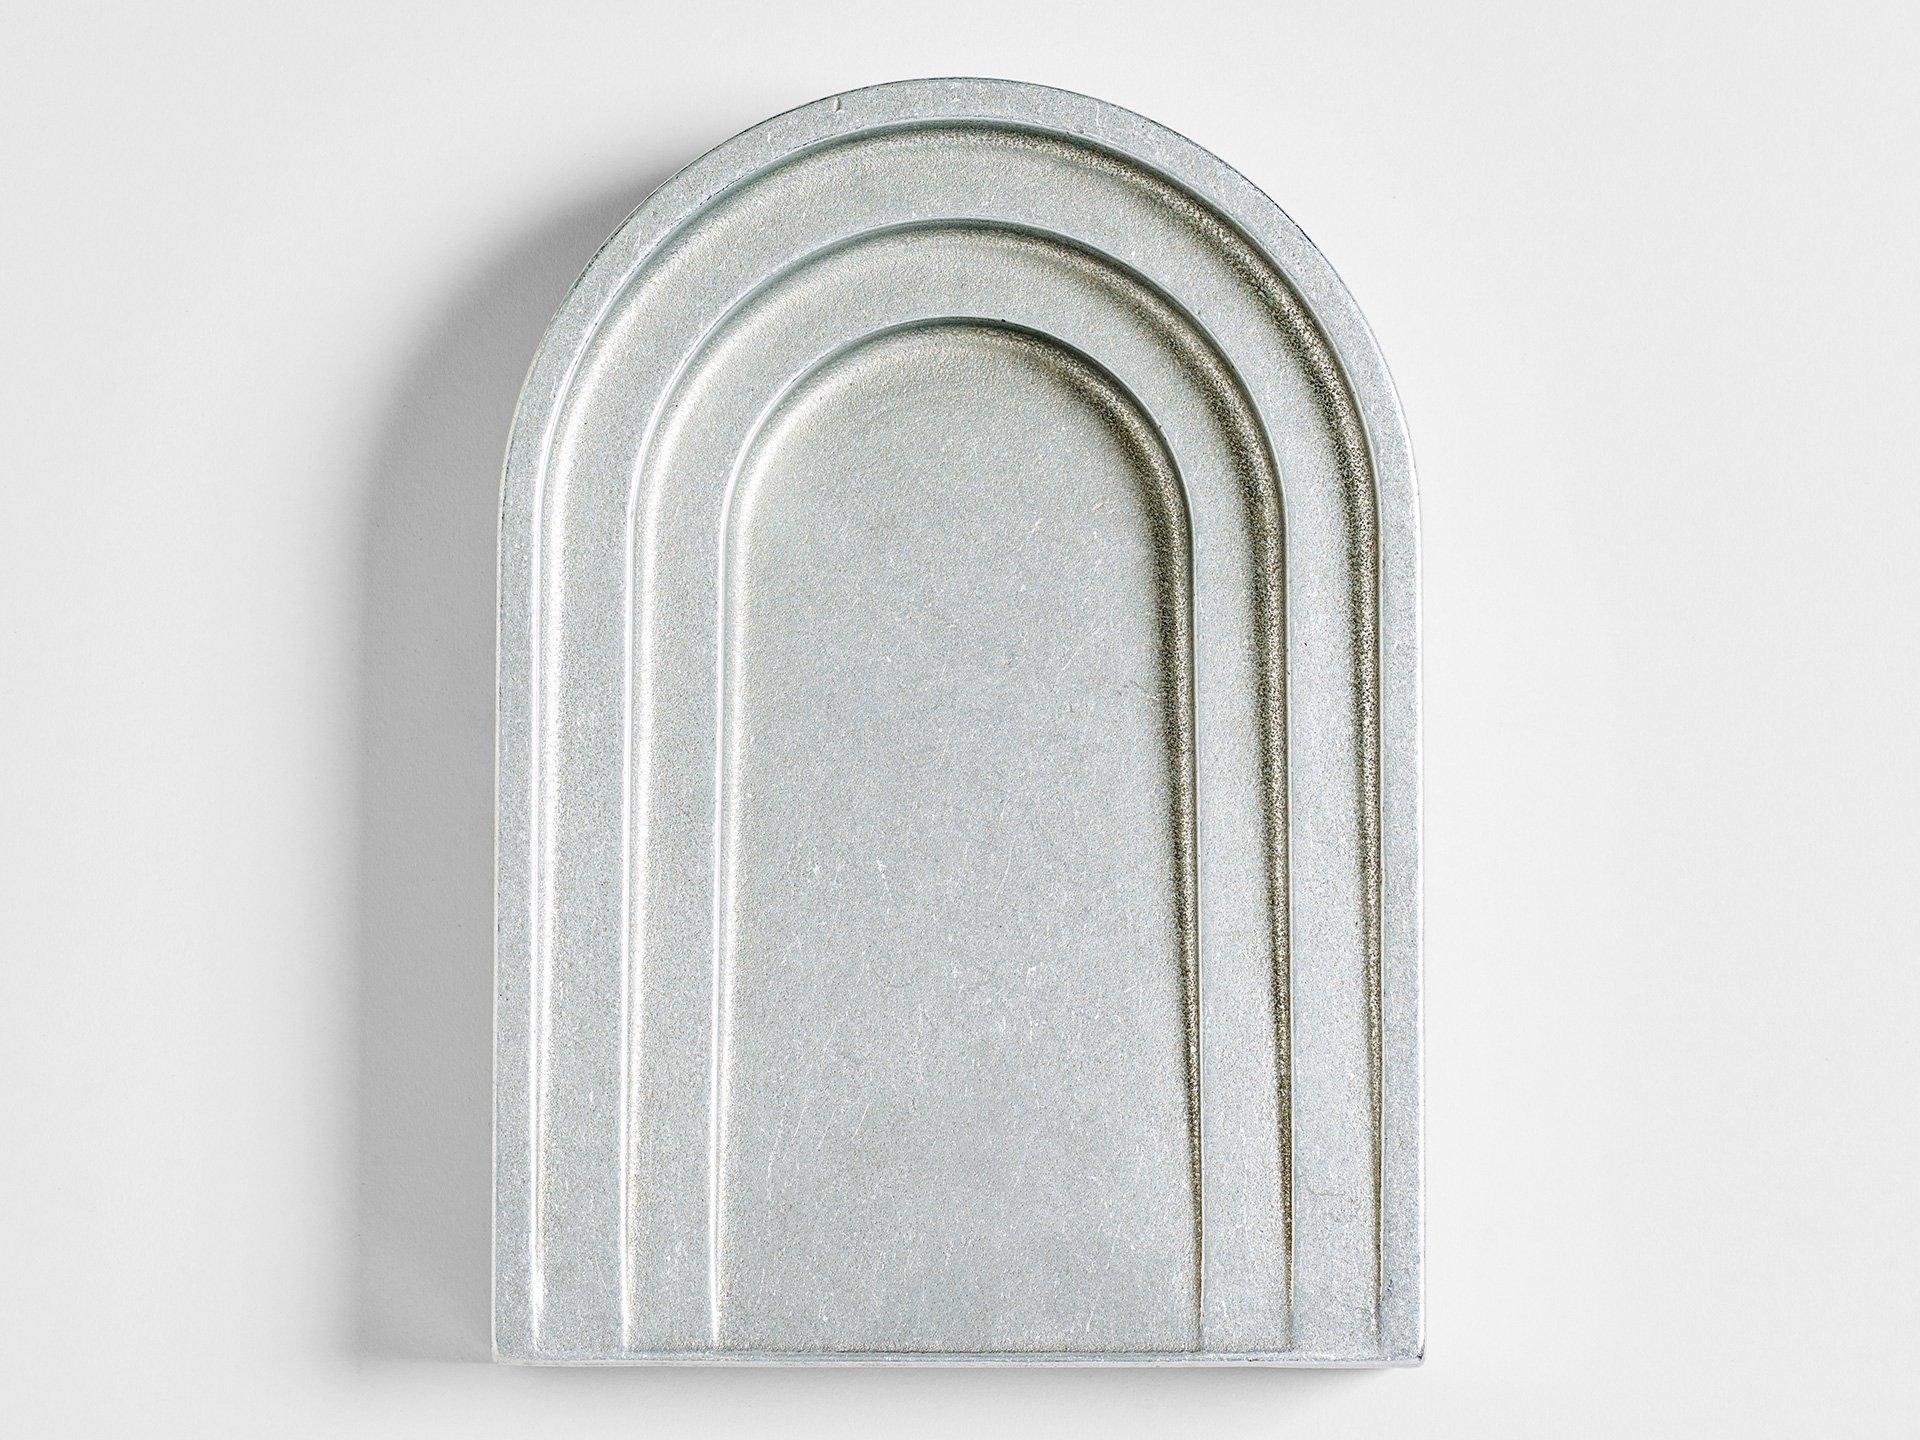 Polished Aluminium Thoronet Dish by Henry Wilson
Dimensions: W 20 x D 5 x H 30 cm
Materials: Aluminium 

Thoronet dish, shares its' name and arched lines with the Abby in the south of France. It is made, polished and finished in Sydney, Australia in